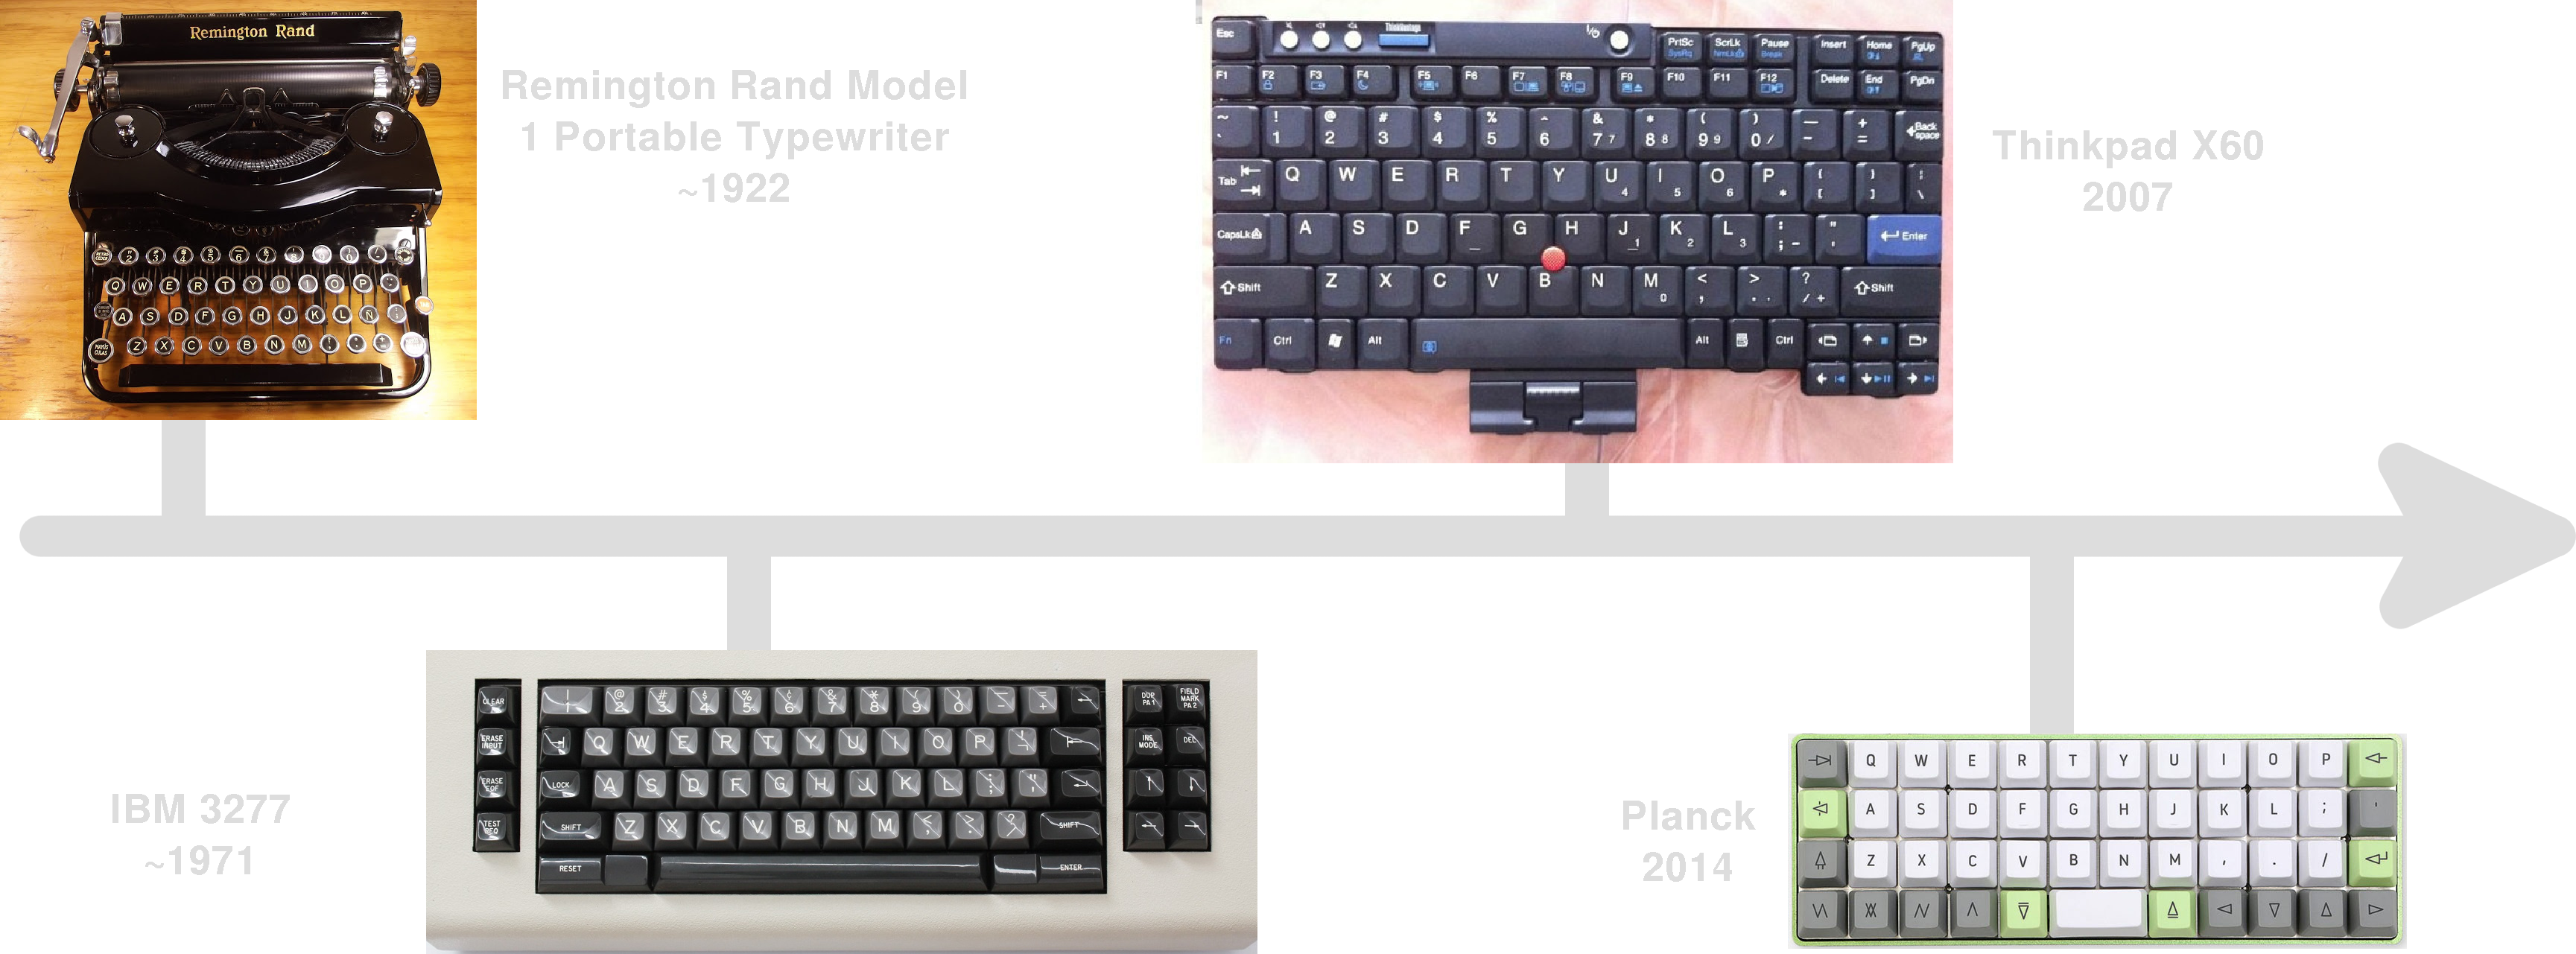 Timeline of various keyboards with reducing spacebars right up until the Plank